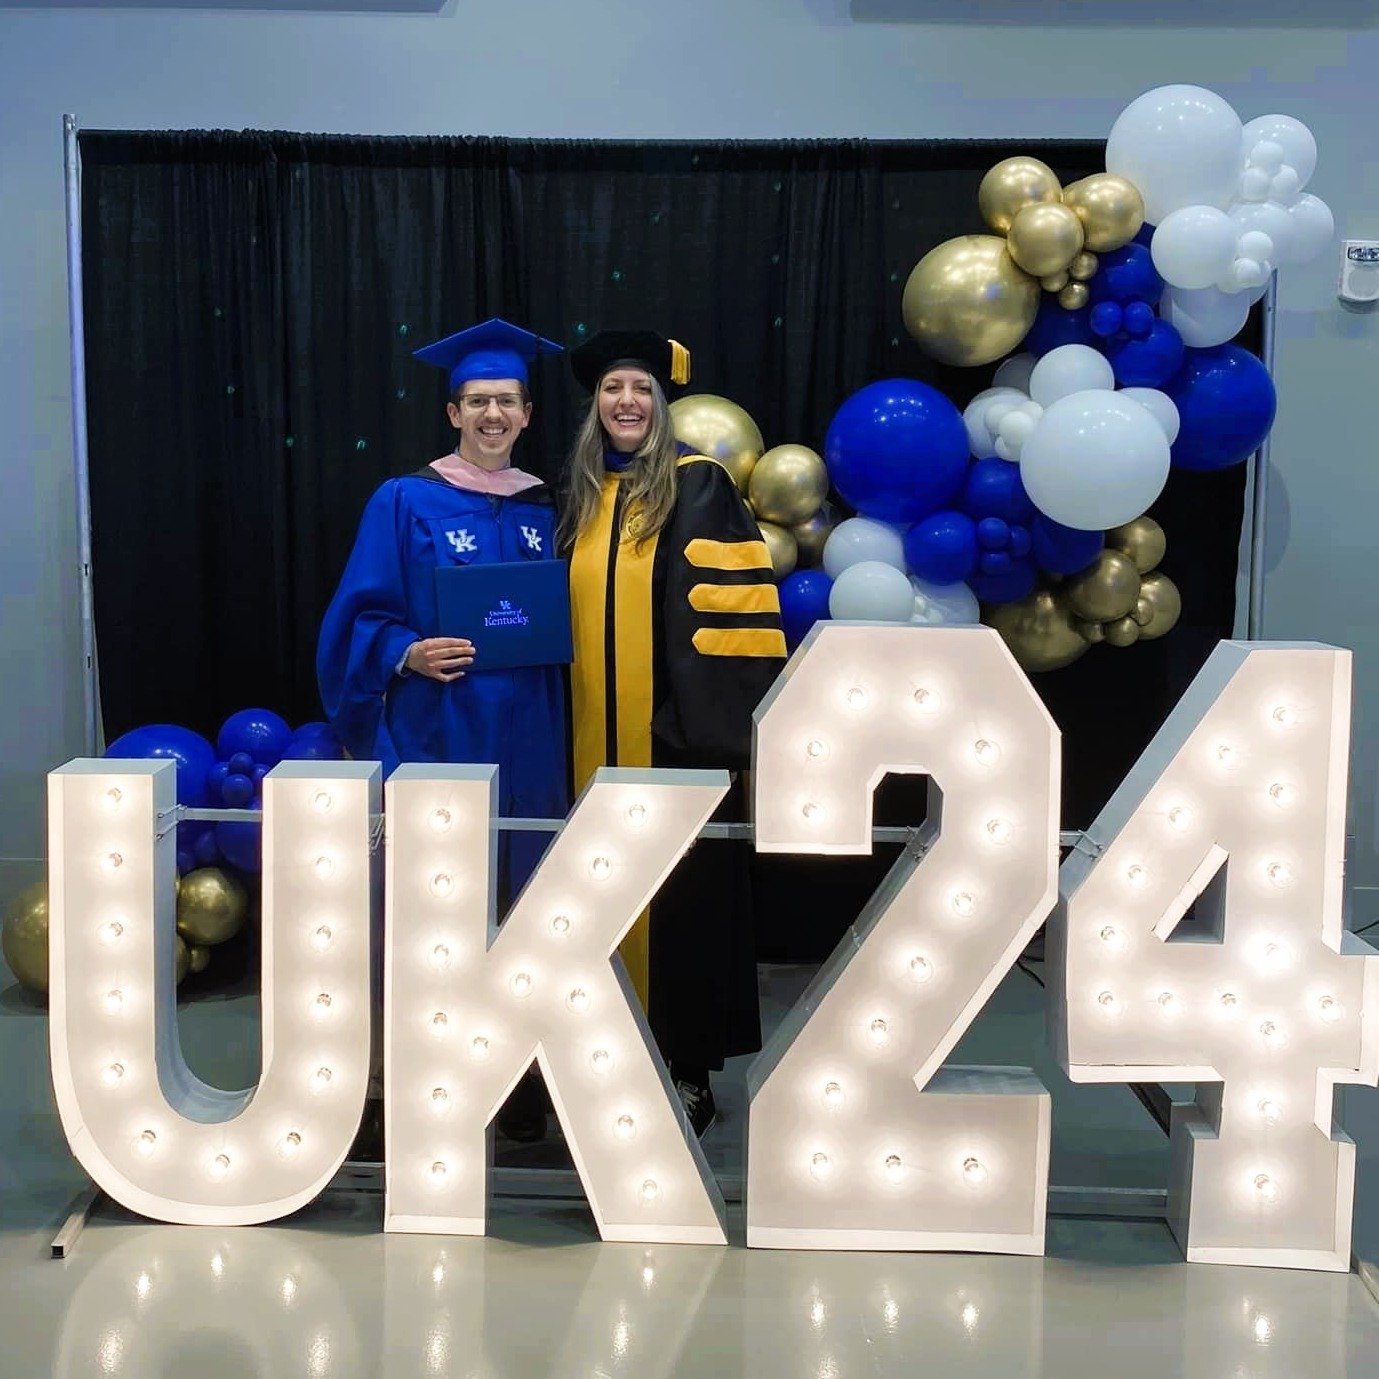 Please join me in congratulating our music therapist, Caleb, who graduated this weekend for his Master's in Music Therapy from the University of Kentucky! 👨&zwj;🎓🥳 He'll be defending his Master's Thesis this Summer to officially complete this degr